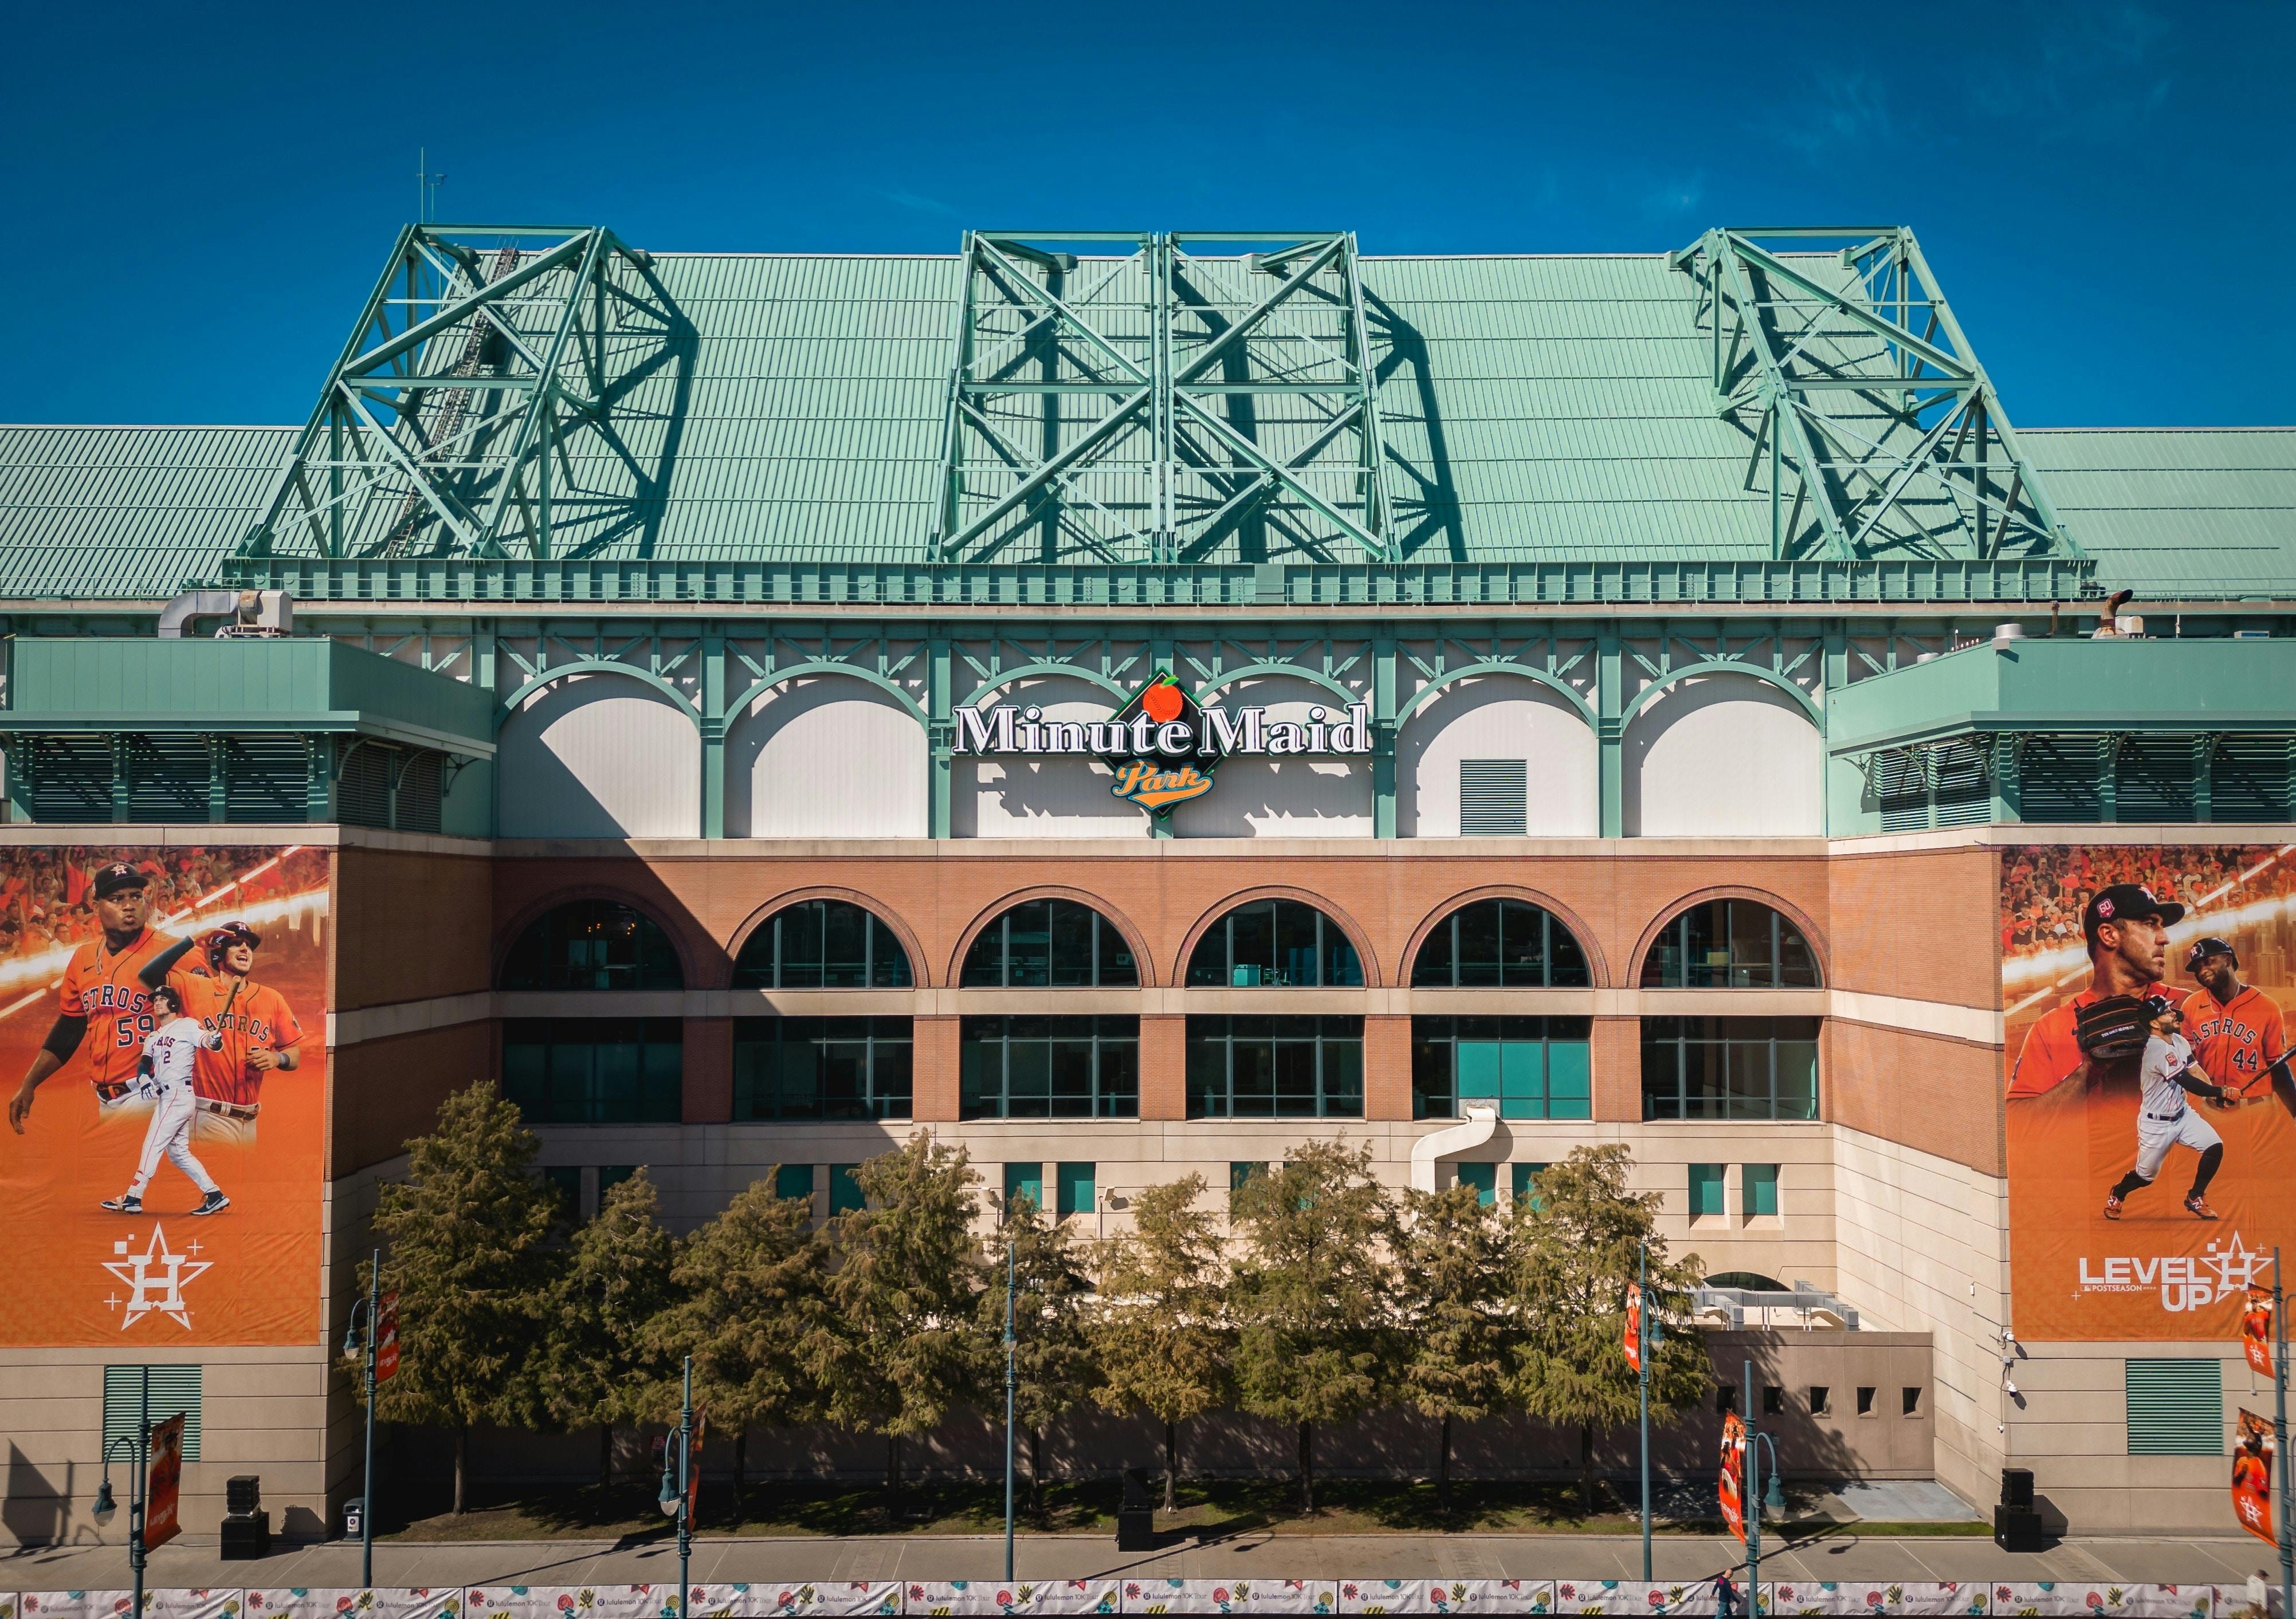 Minute Maid Park, MLB's Second Retractable-Roof-Ballpark